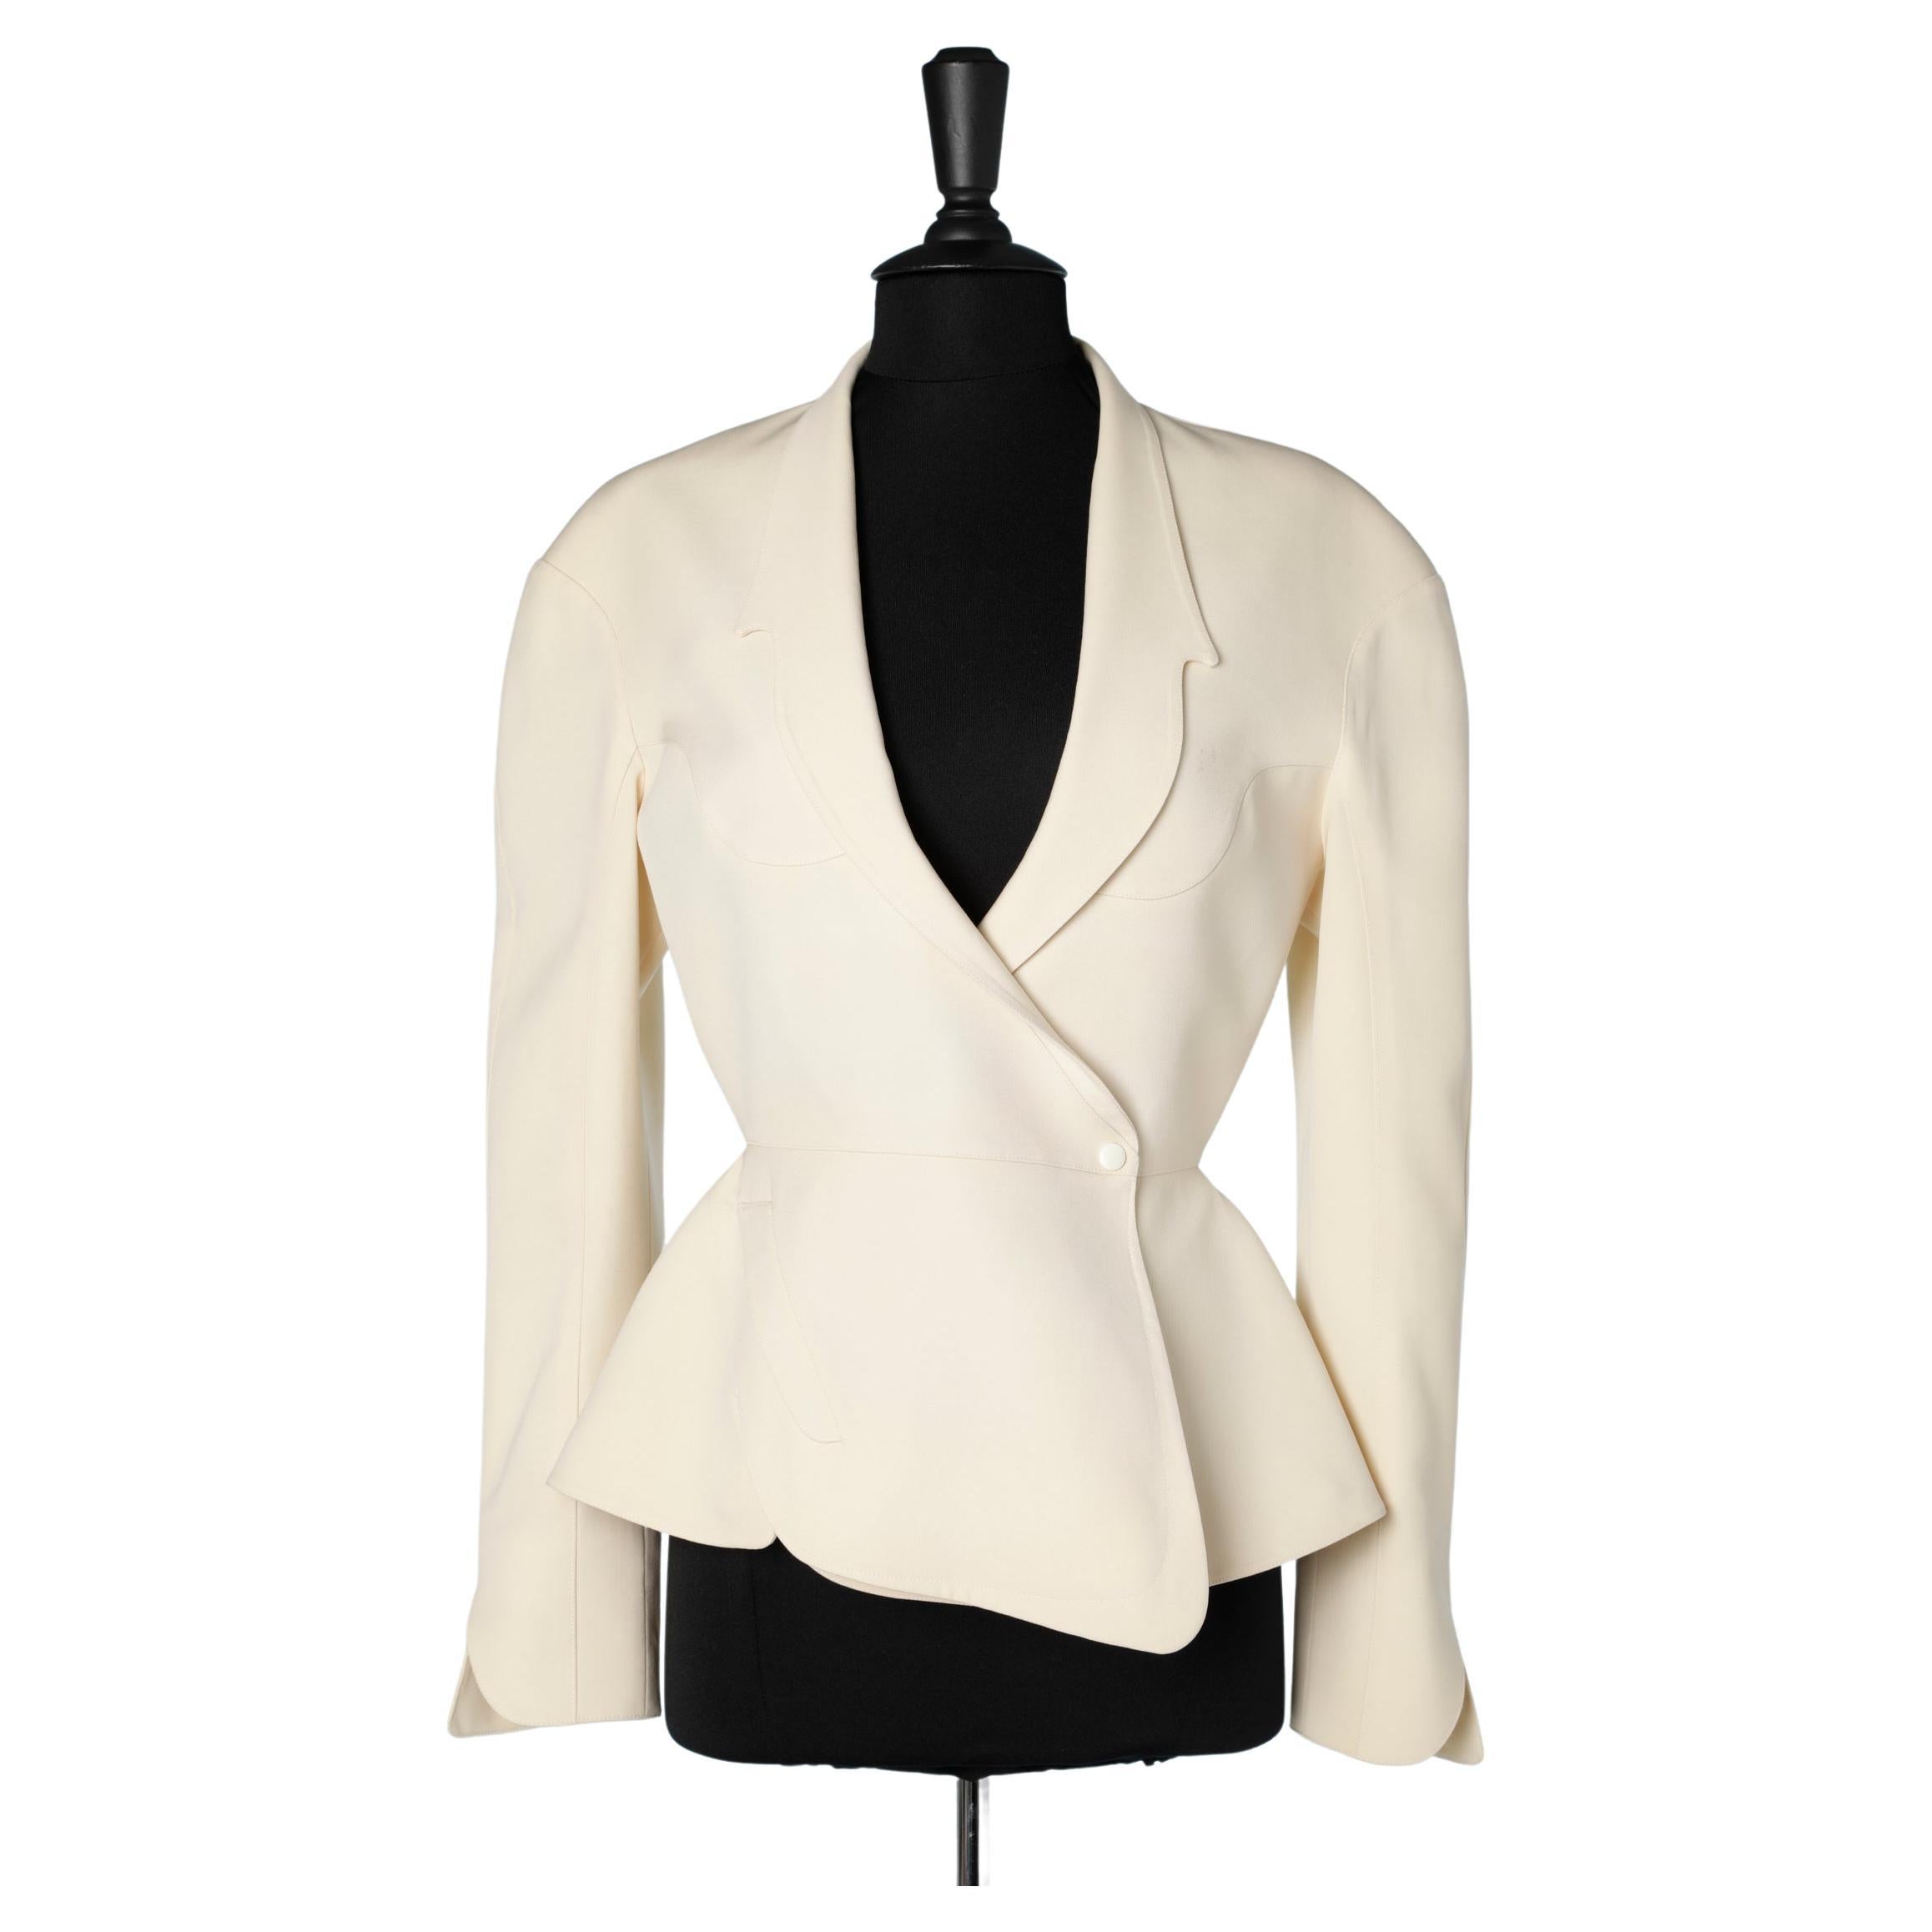 Ivory double-breasted jacket in wool Thierry Mugler 